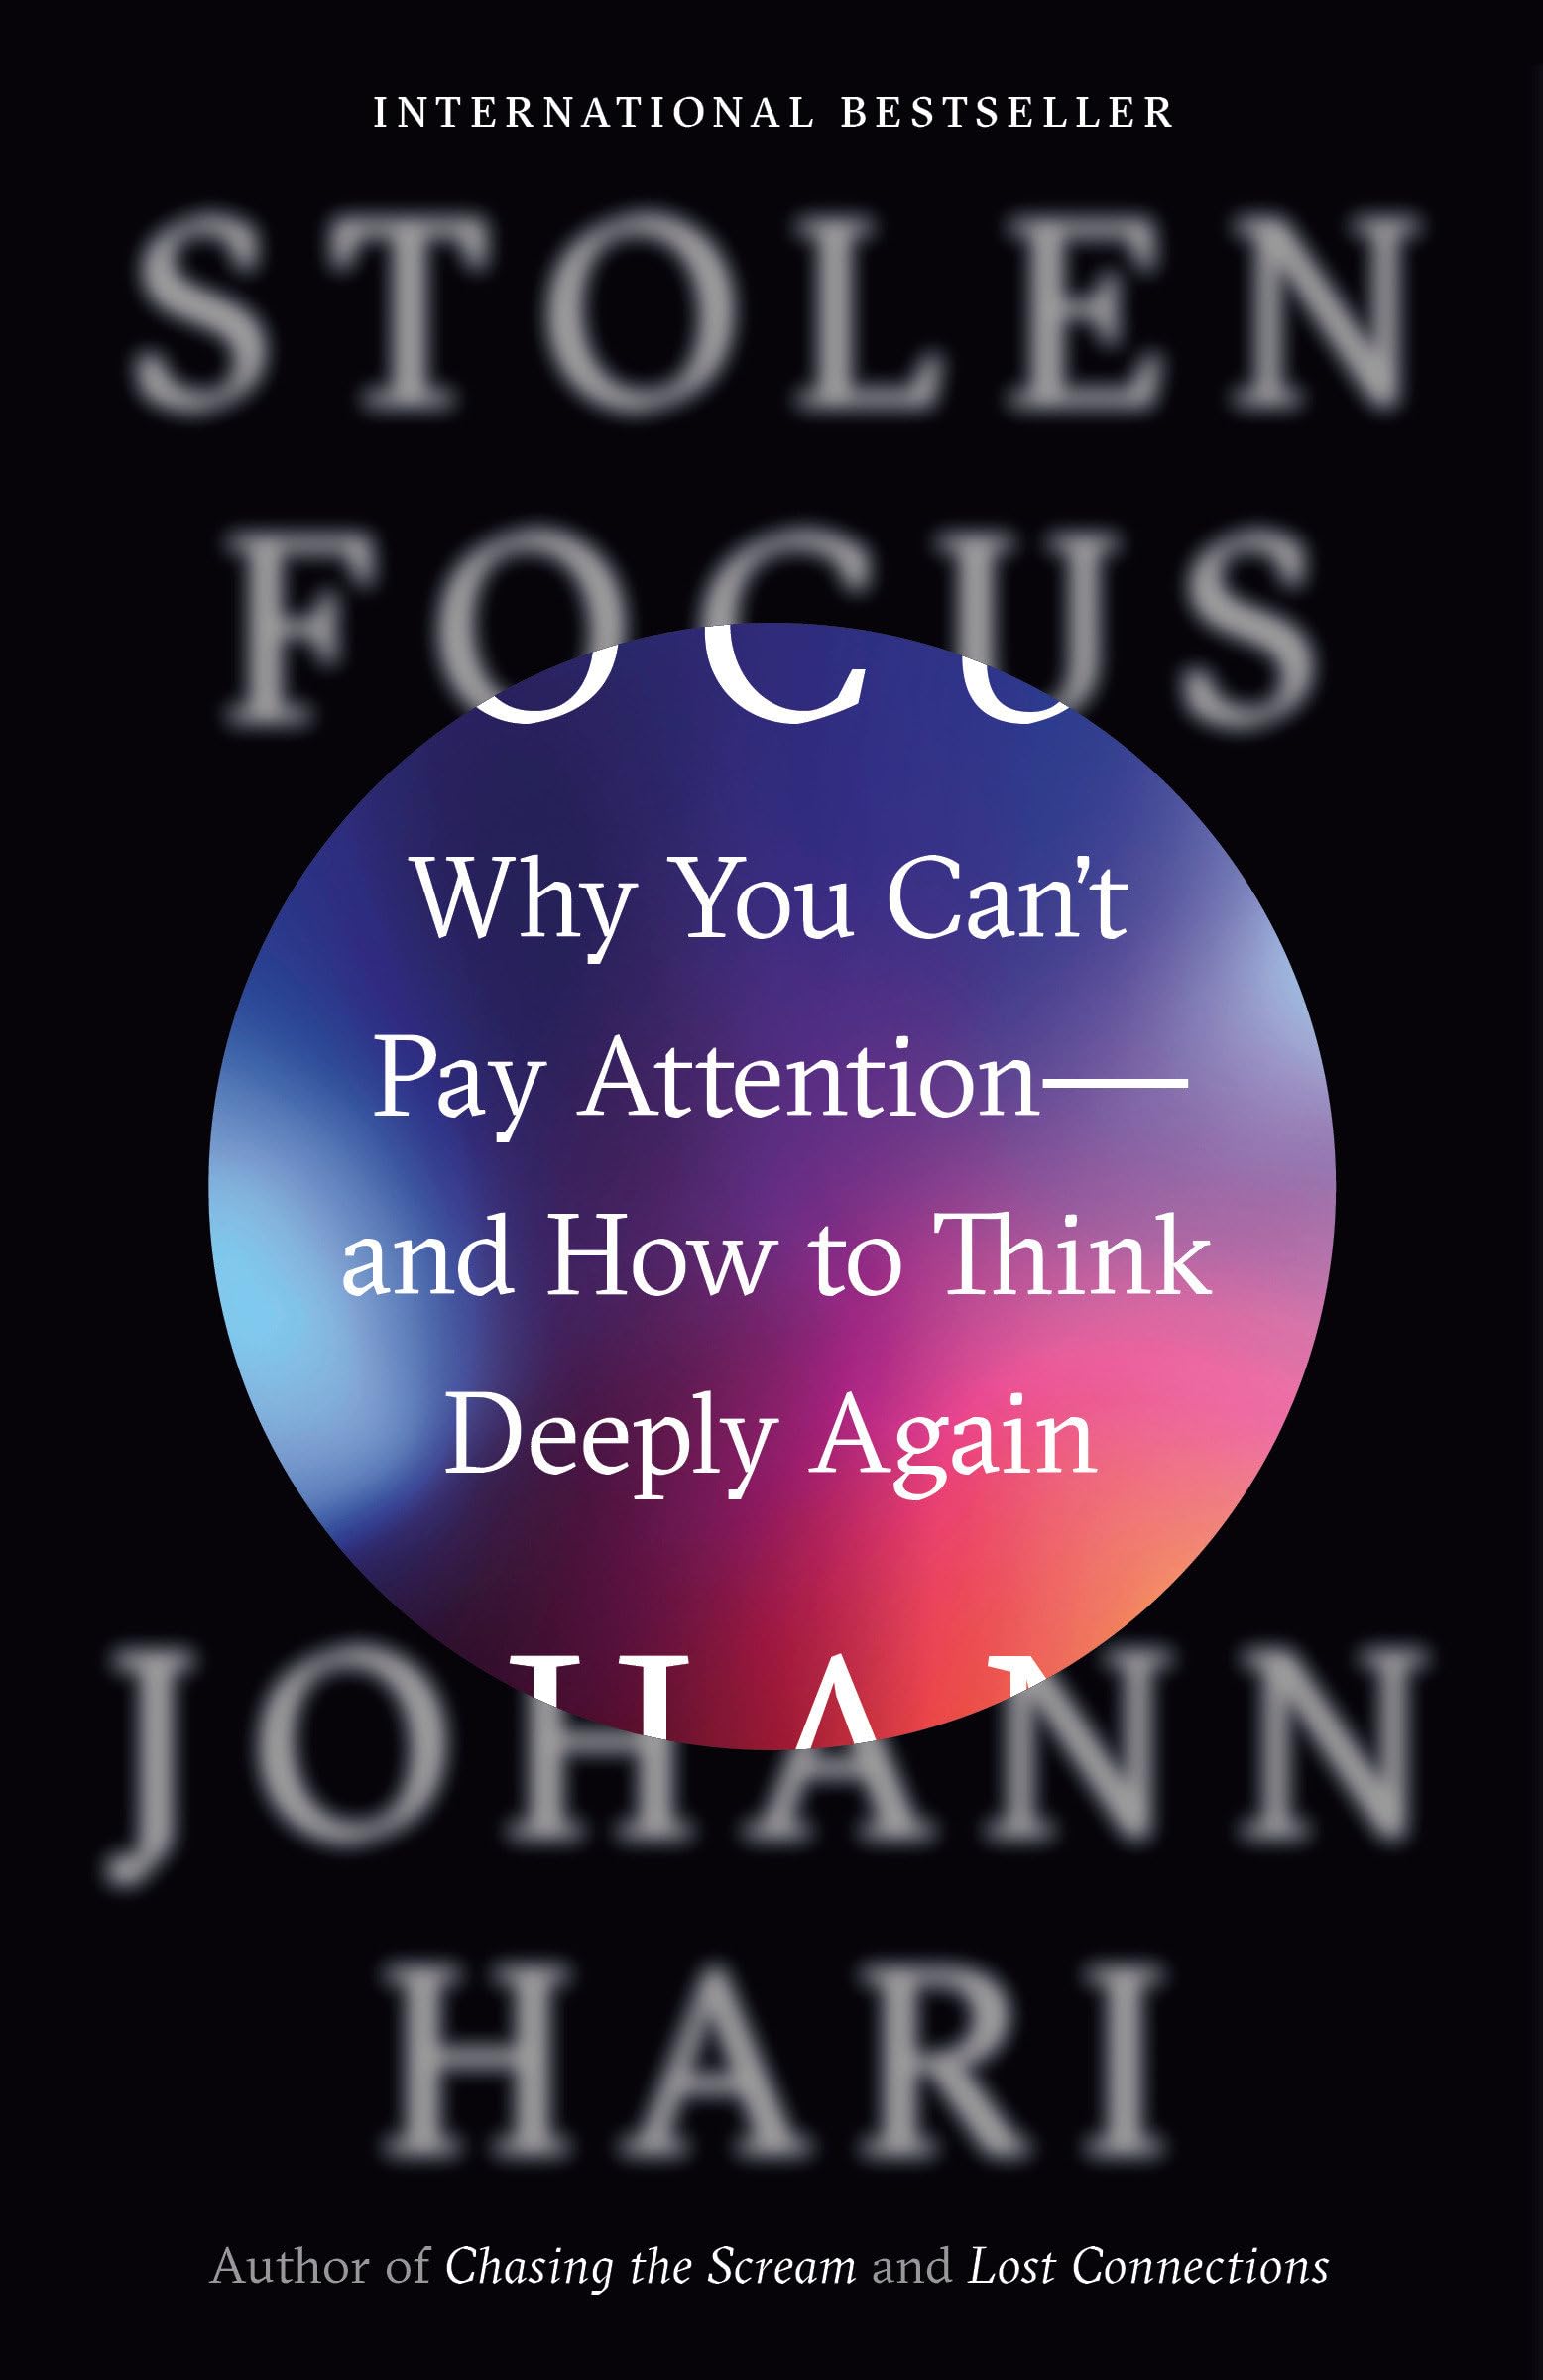 Stolen Focus: Why You Can't Pay Attention--And How to Think Deeply Again by Hari, Johann